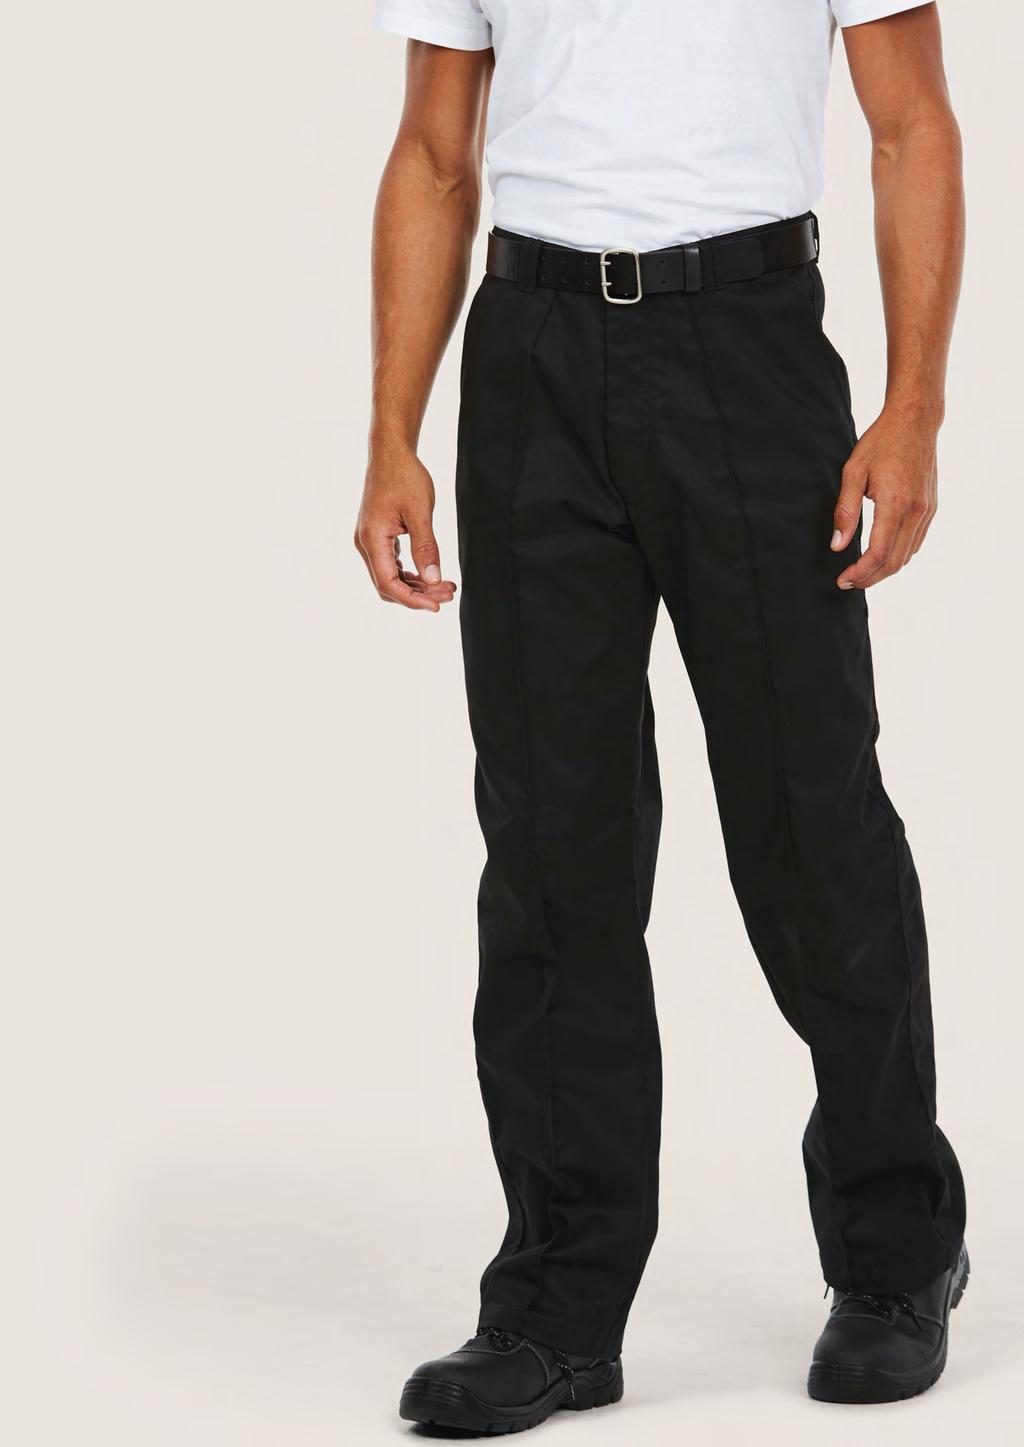 TROUSERS UC901 UNISEX WORKWEAR TROUSER 245 60 25/5 65% Polyester 35% Cotton Fabric: 245 /7 oz Flat front with sewn-in front crease Two Front Pockets Rear buttoned back pocket Metal rivet button